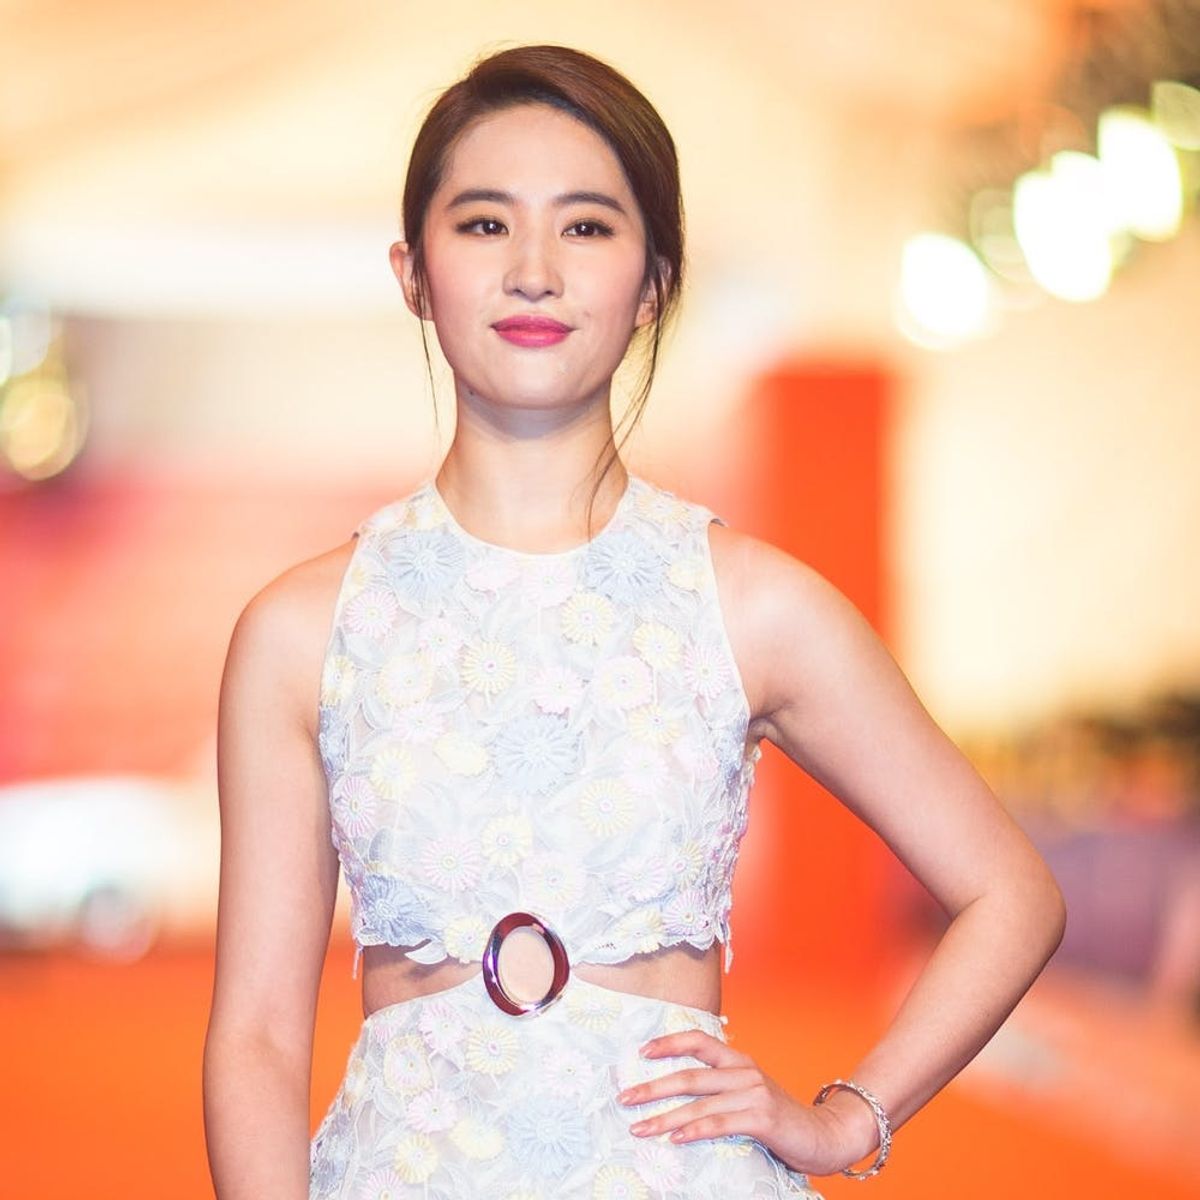 Disney’s Live-Action ‘Mulan’ Has Found Its Star in Liu Yifei